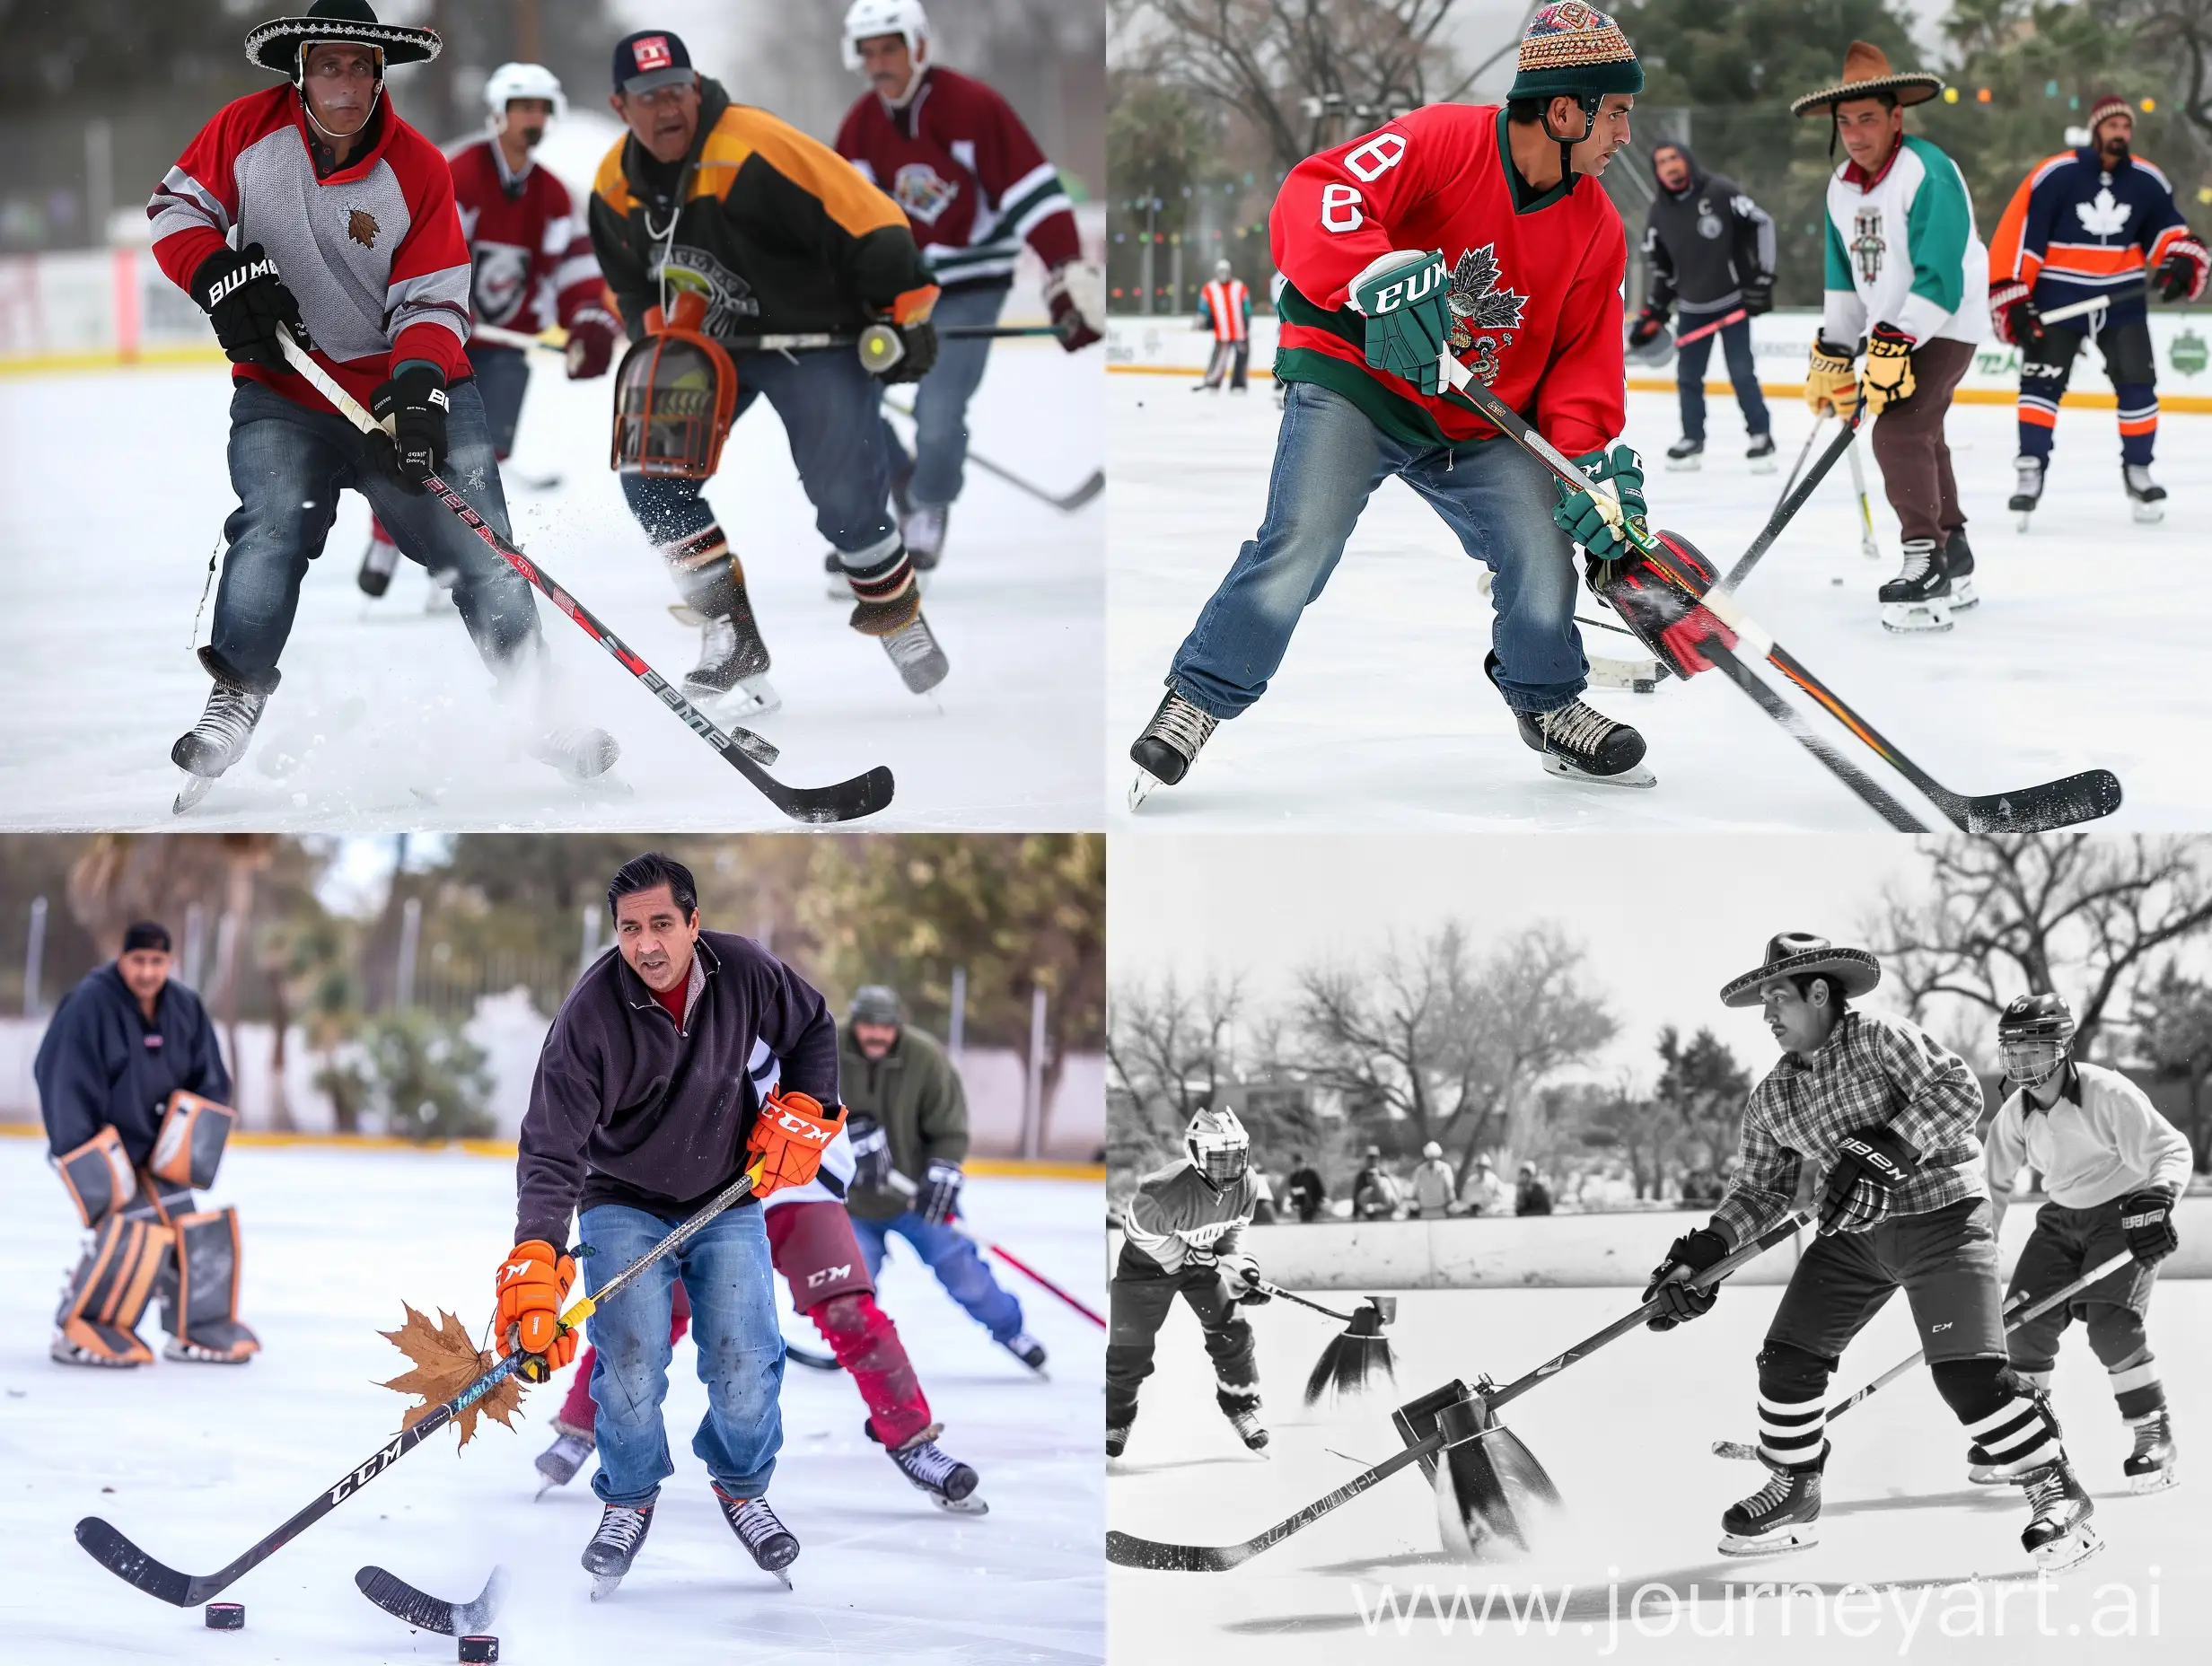 Mexican-Men-Playing-Ice-Hockey-with-Leaf-Blowers-Unconventional-Sports-Fun